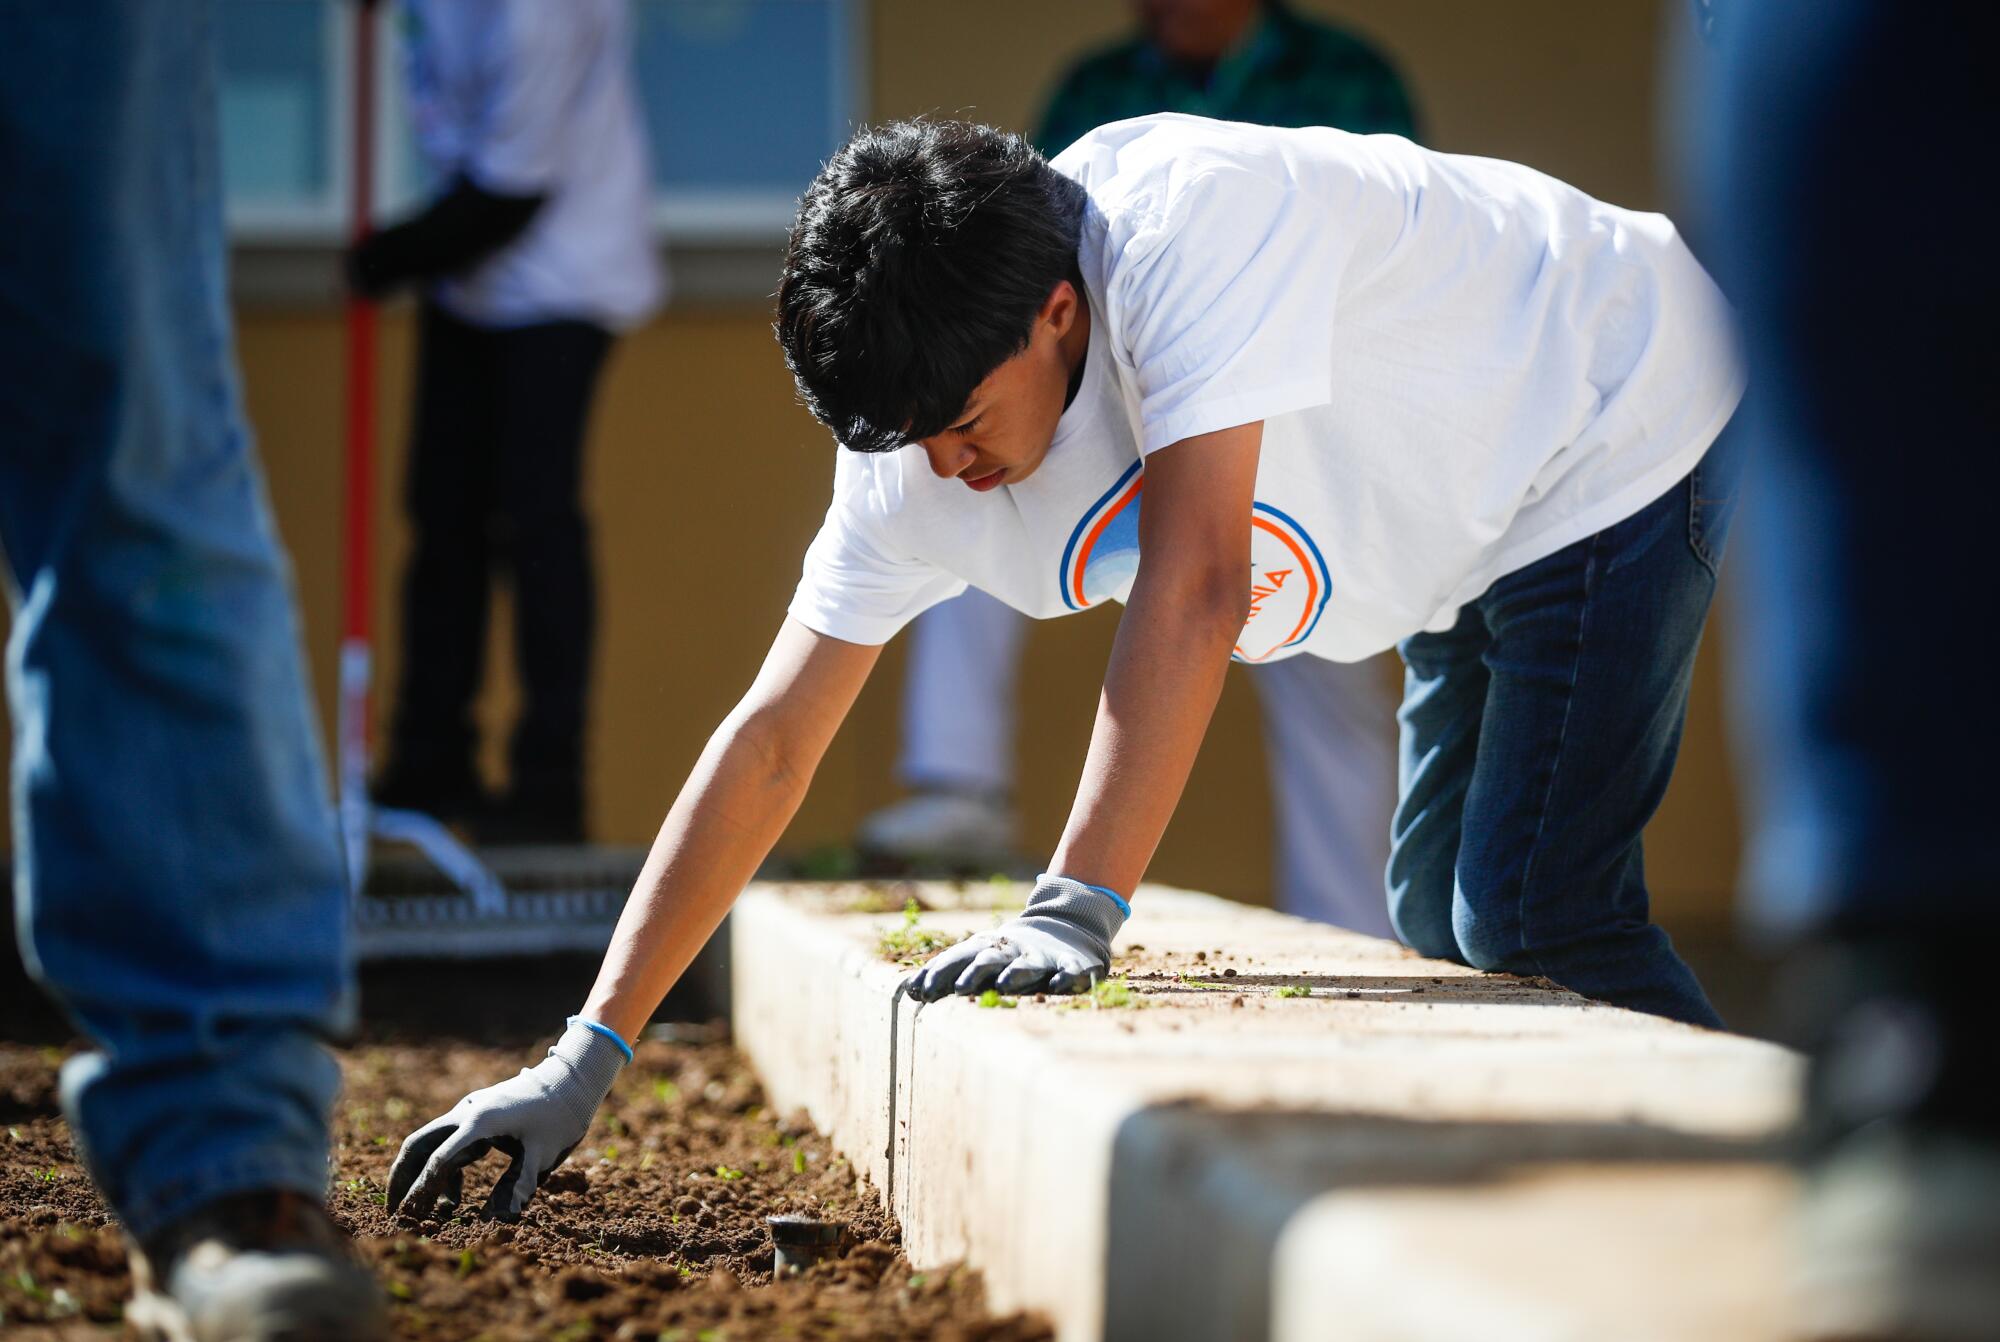 A student wearing garden gloves reaches into the dirt.